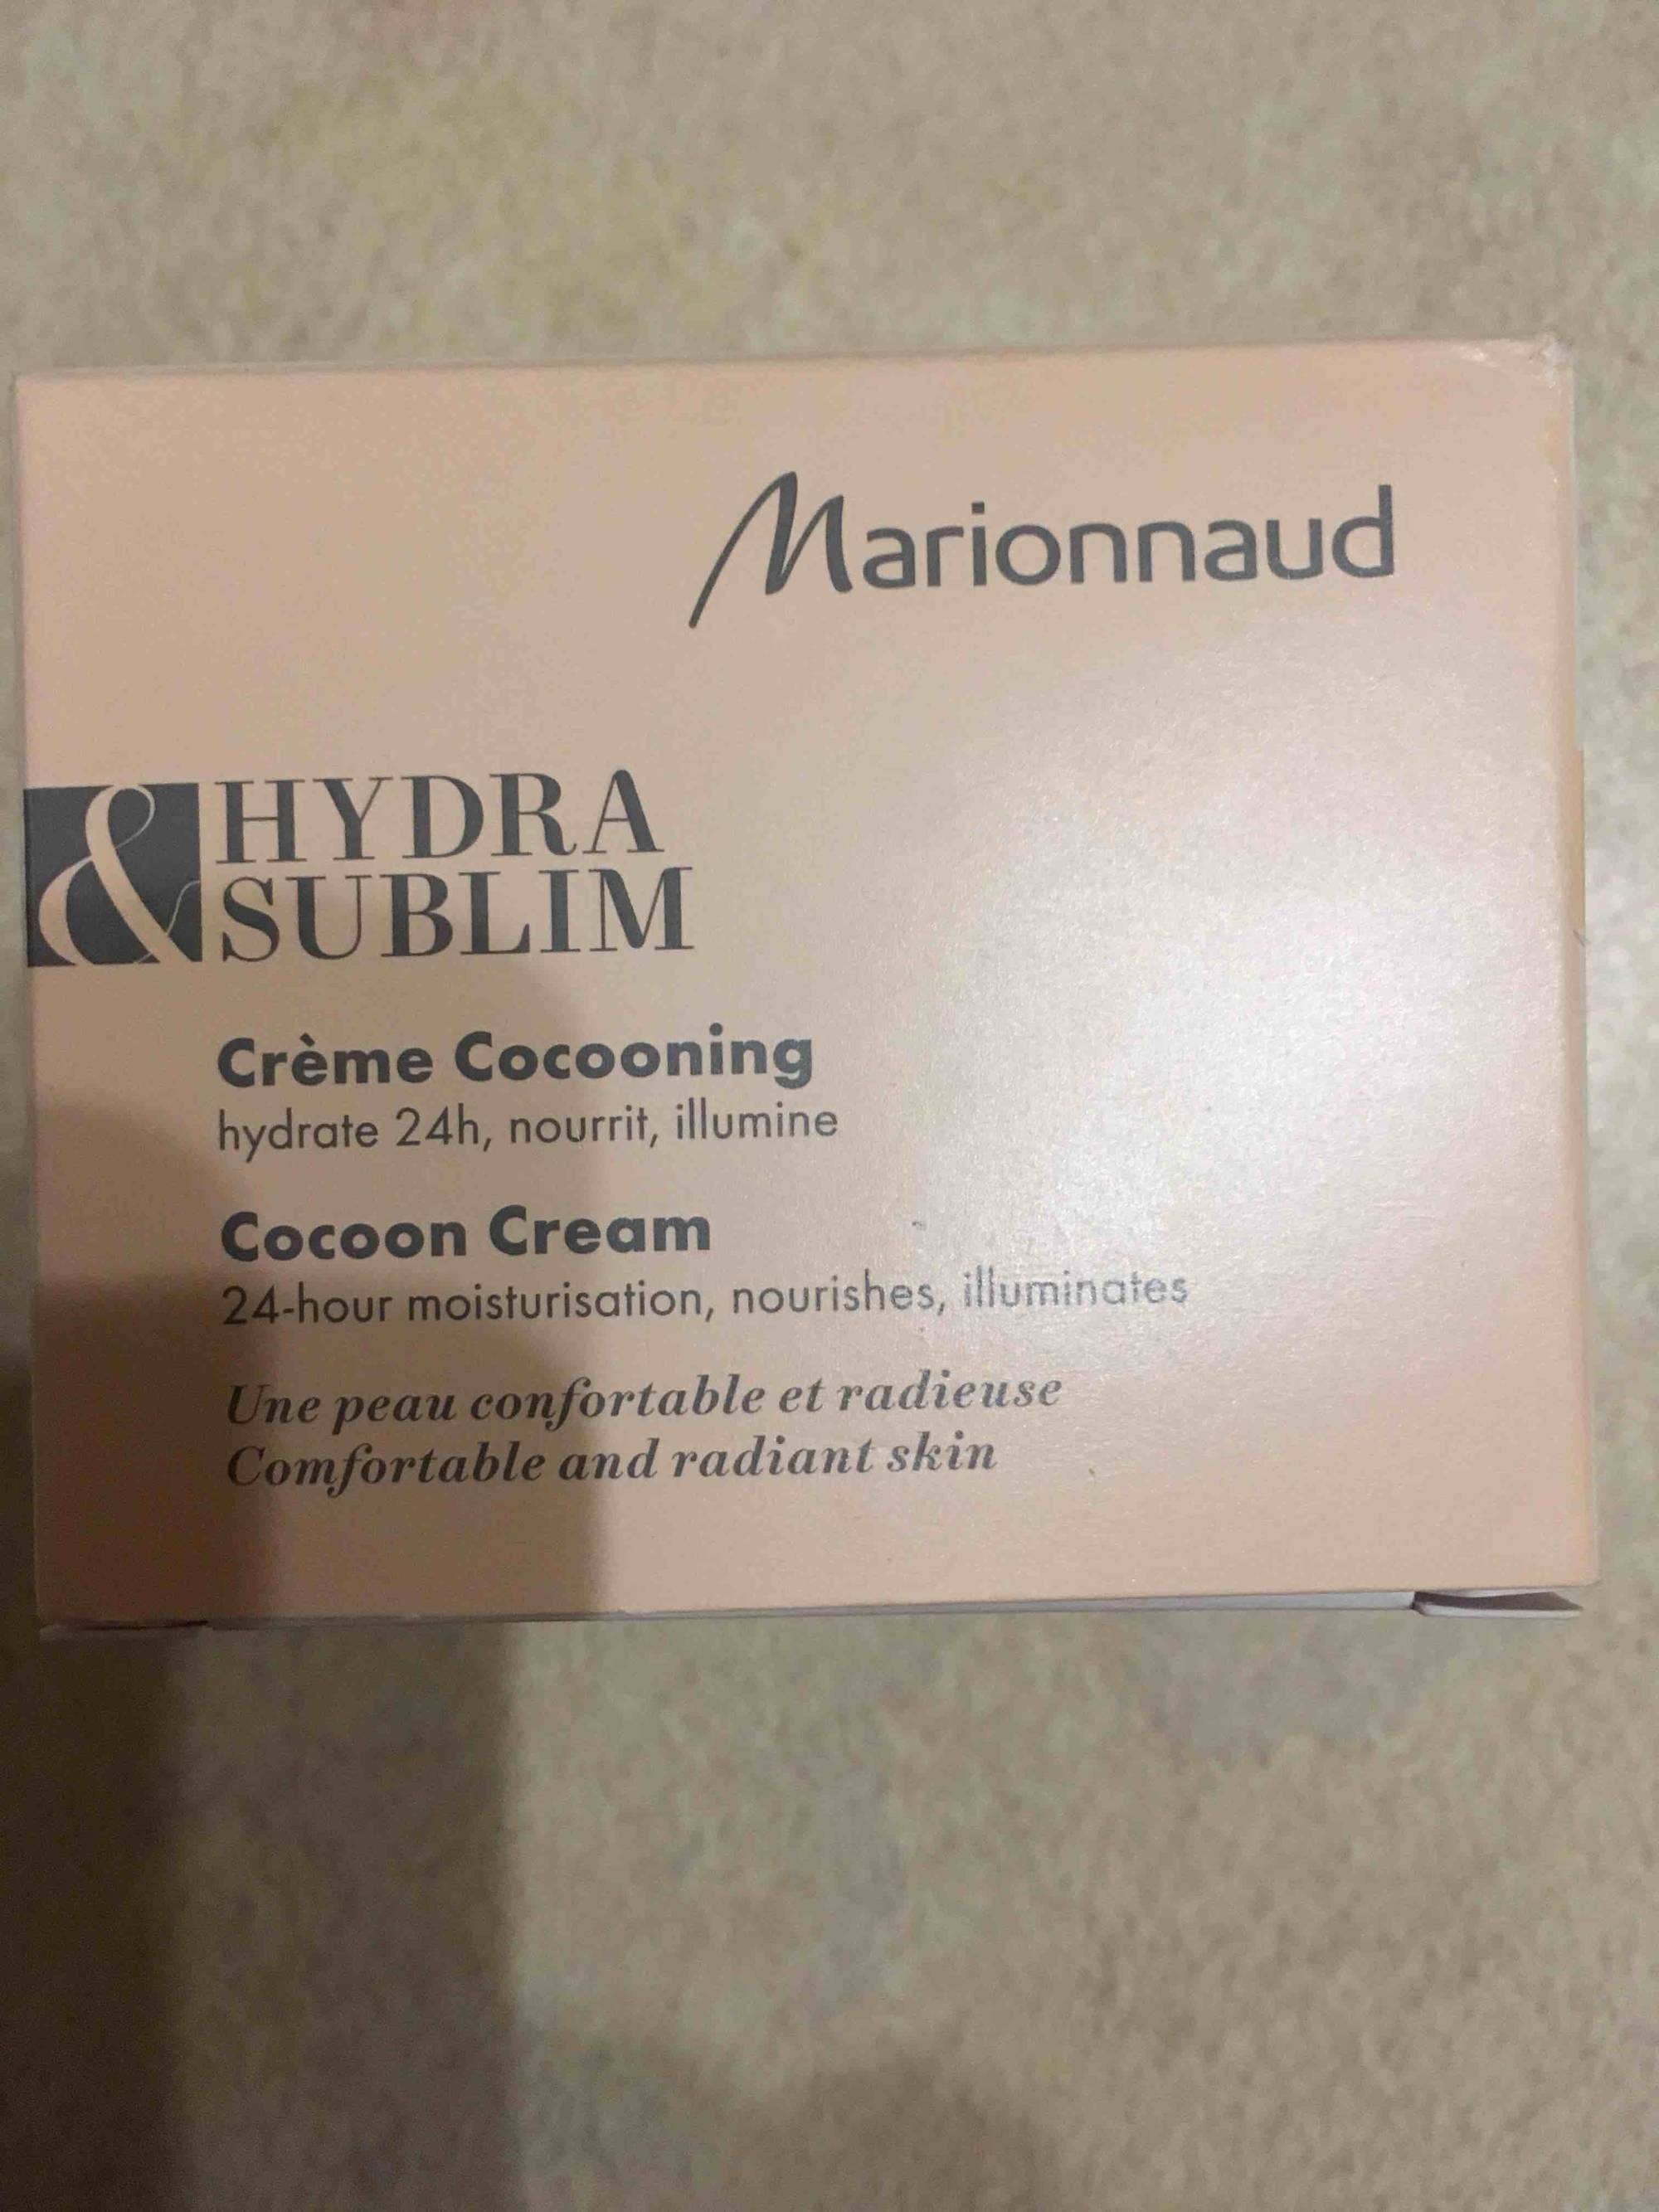 MARIONNAUD - Hydra & sublim - Crème cocooning hydrate 24h